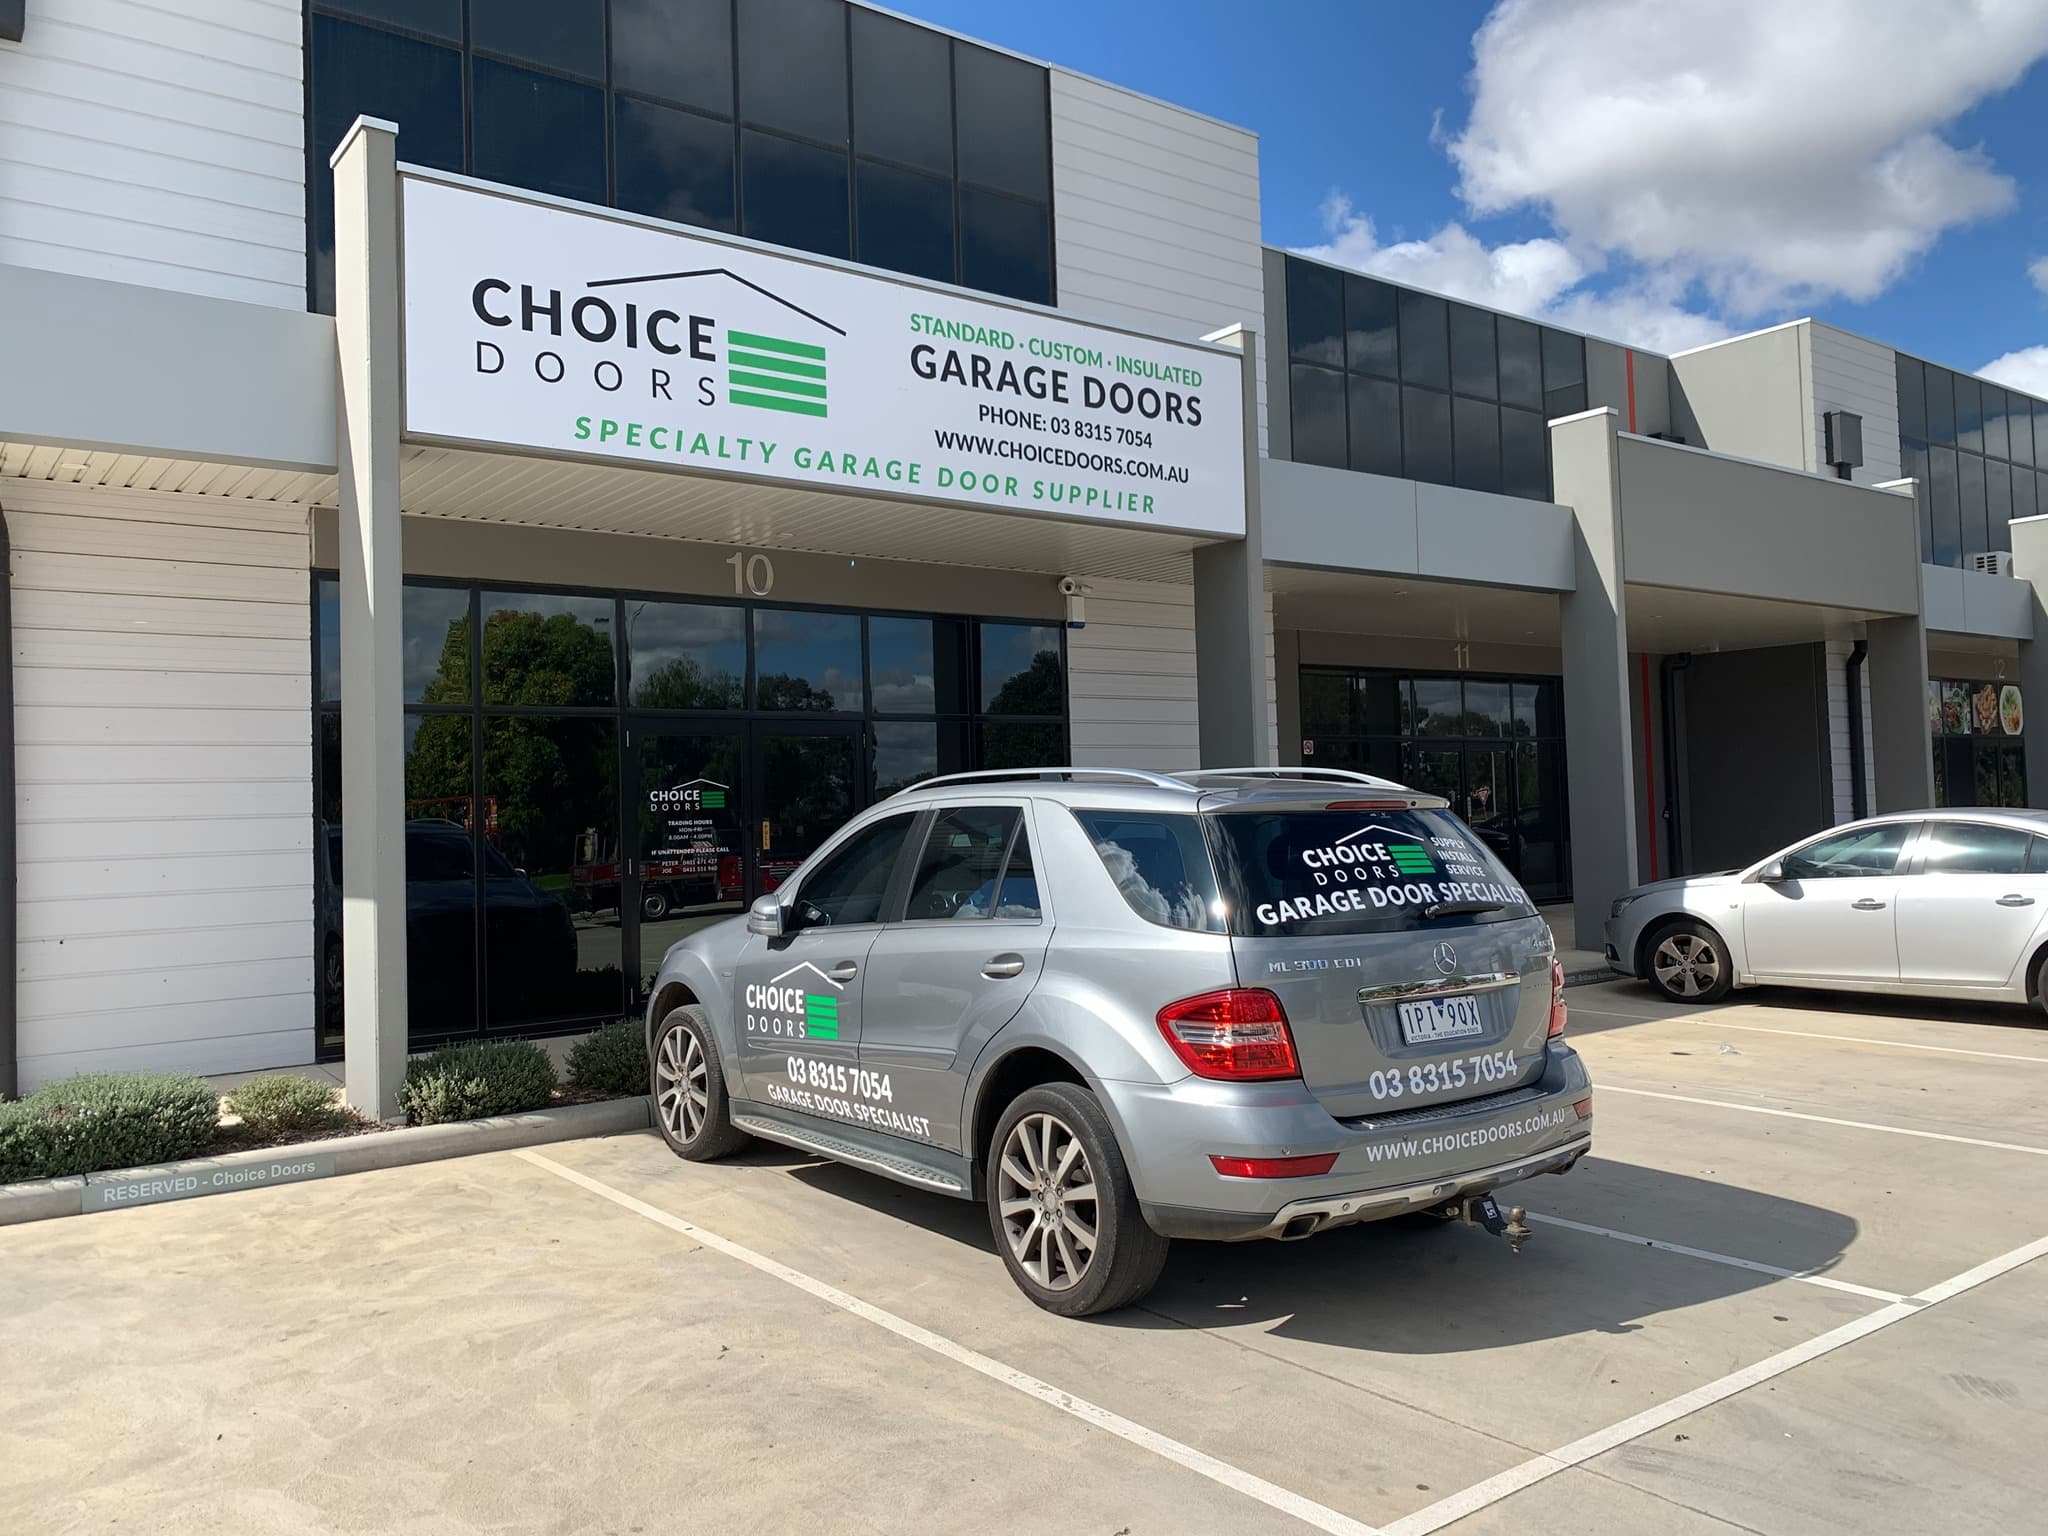 Choice Doors store front in Derrimut